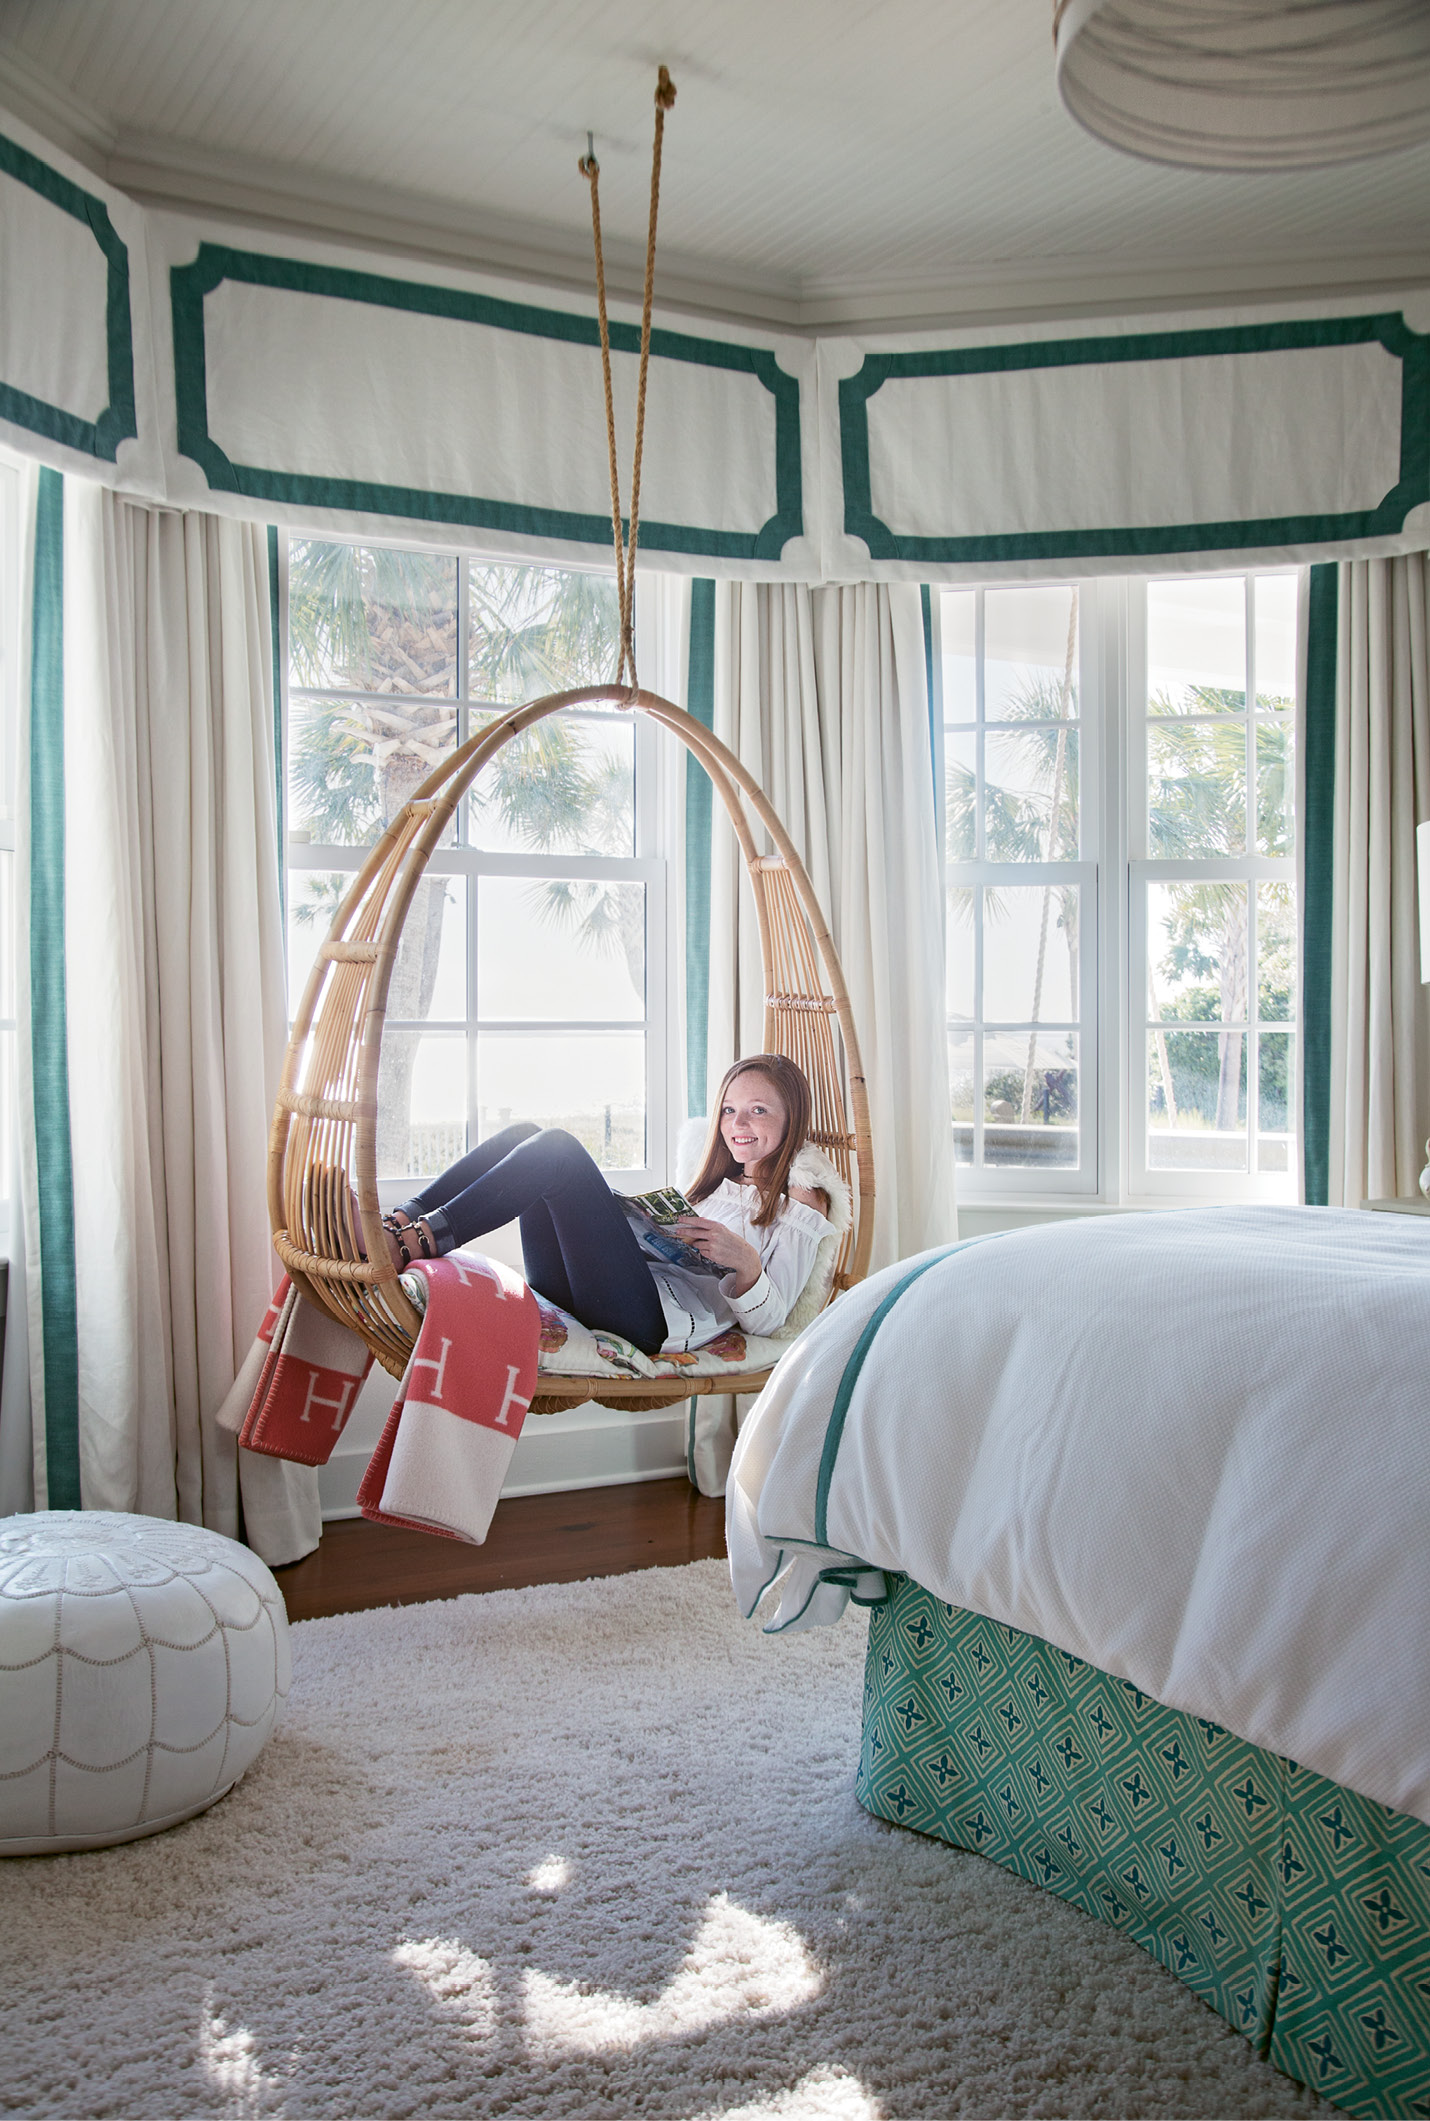 IN THE SWING: Alyssa’s room features a favorite spot for lounging or doing homework.